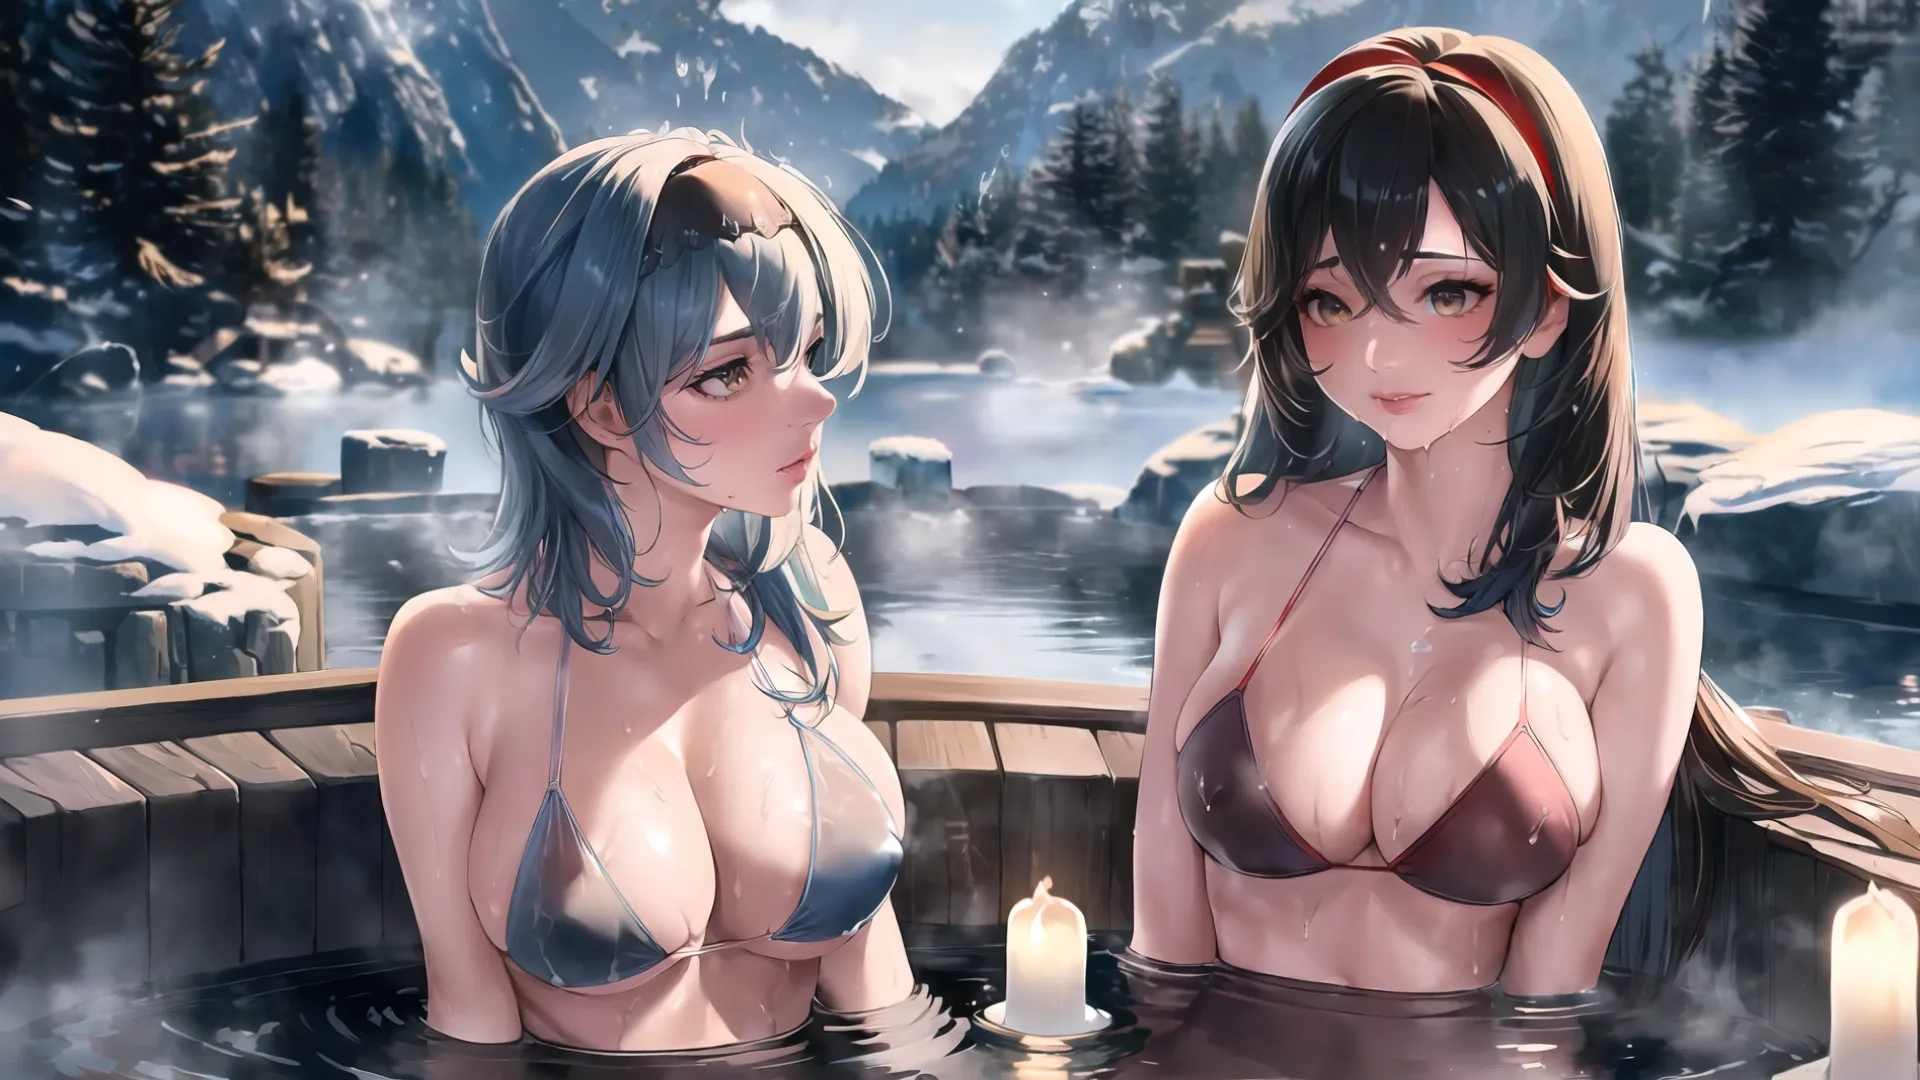 two young women sitting in a boat with water around them holding lit candles while wearing lingeries in the background that's full of mountain scenery
